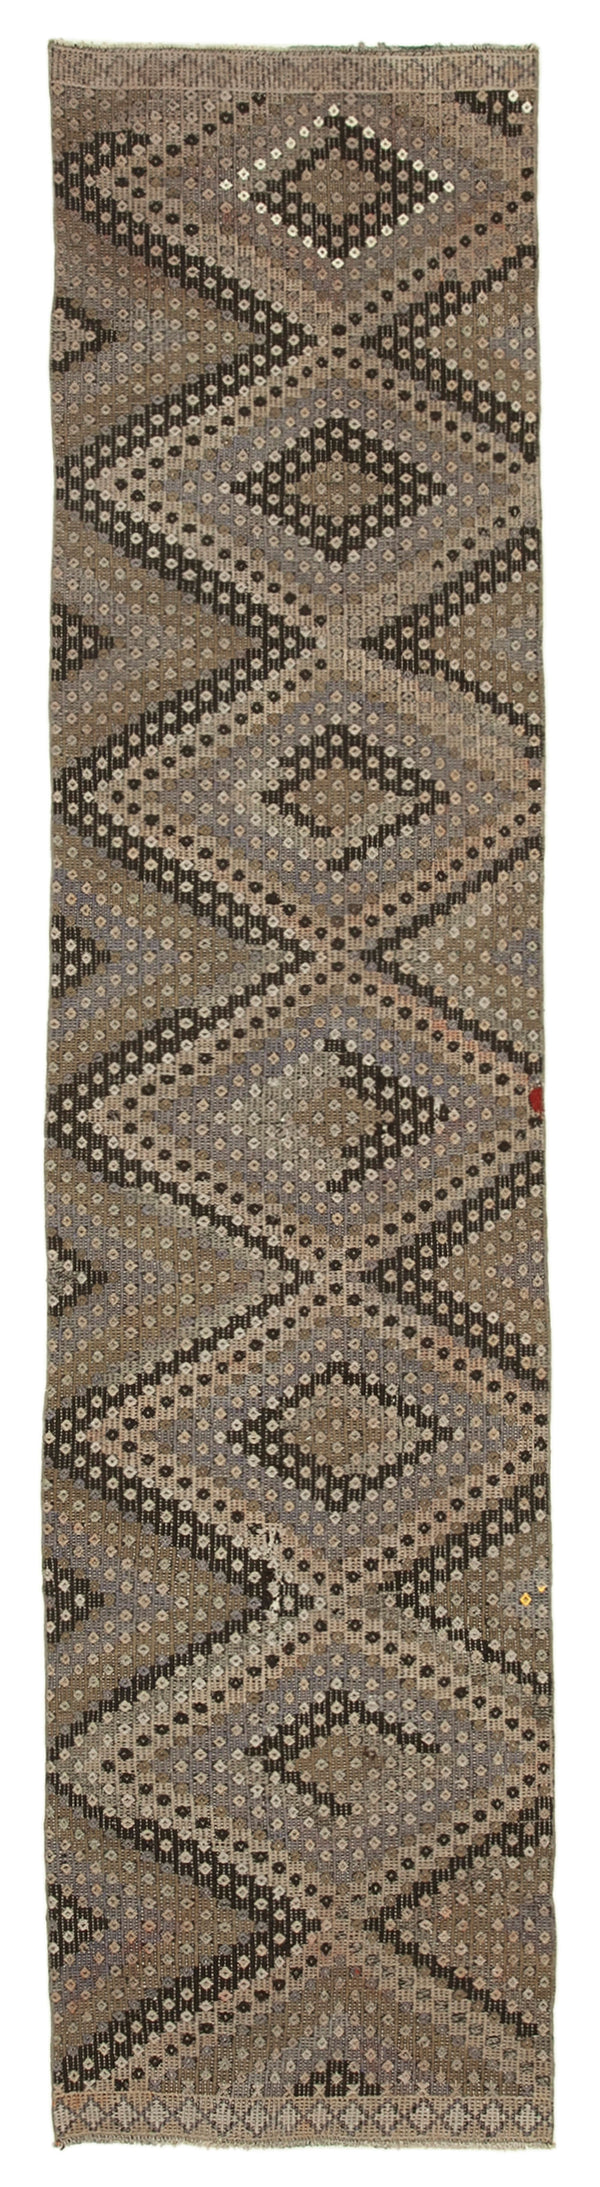 Handmade Kilim Runner > Design# OL-AC-29229 > Size: 2'-8" x 11'-6", Carpet Culture Rugs, Handmade Rugs, NYC Rugs, New Rugs, Shop Rugs, Rug Store, Outlet Rugs, SoHo Rugs, Rugs in USA